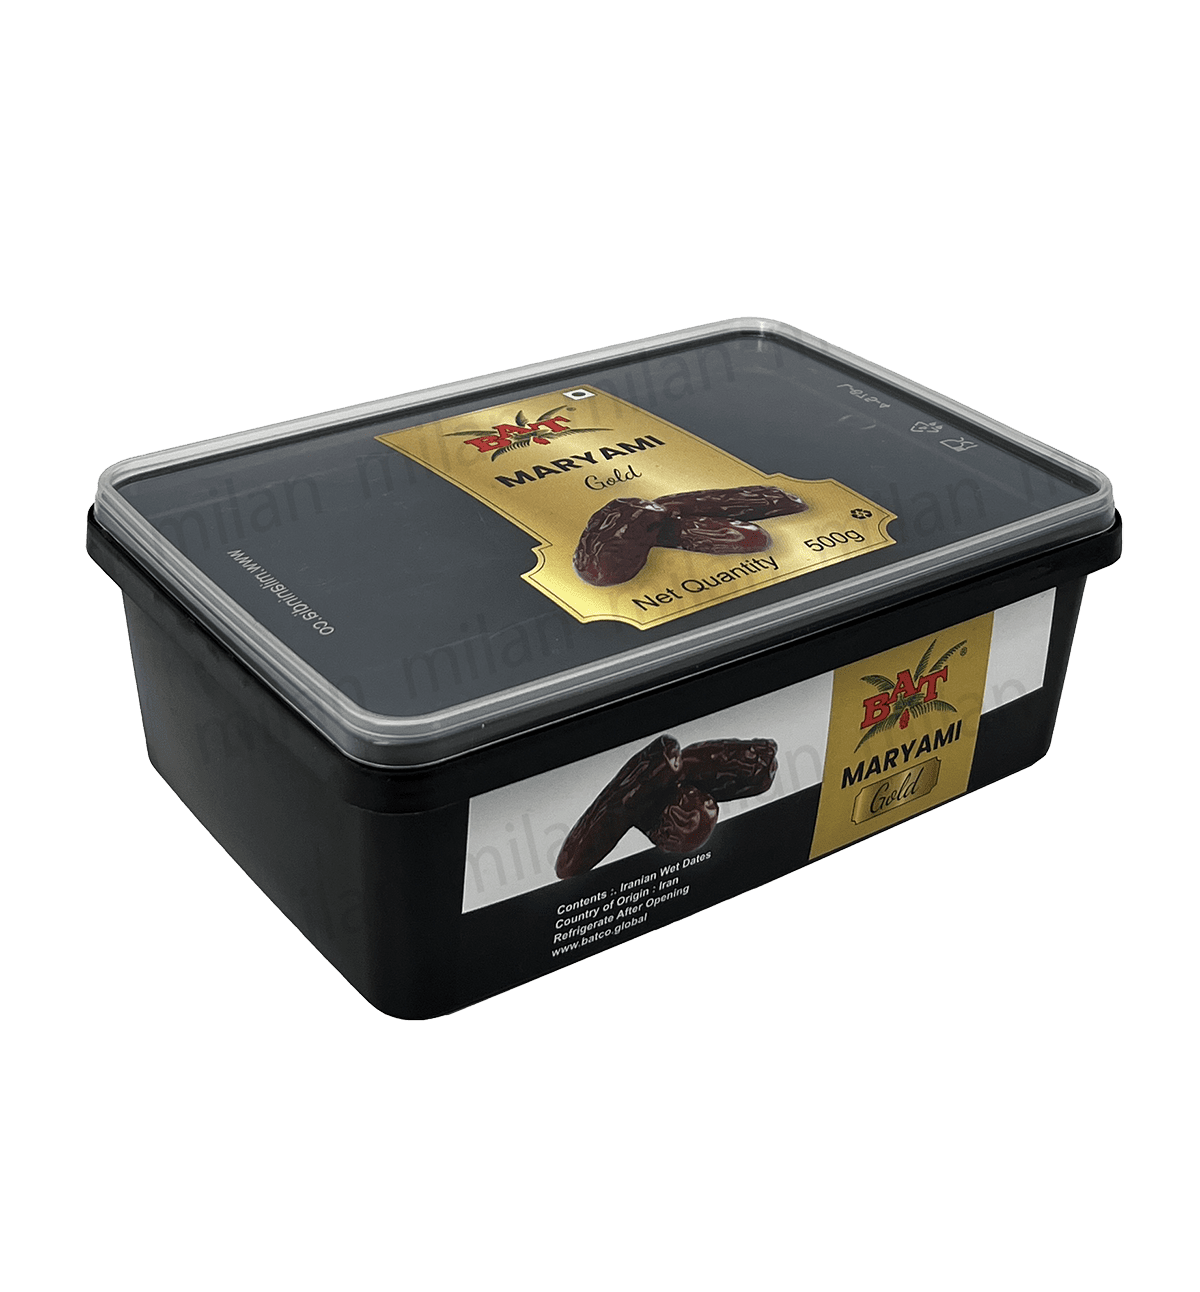 IML Dates Container – Maryami Gold - Packing Plastic Box